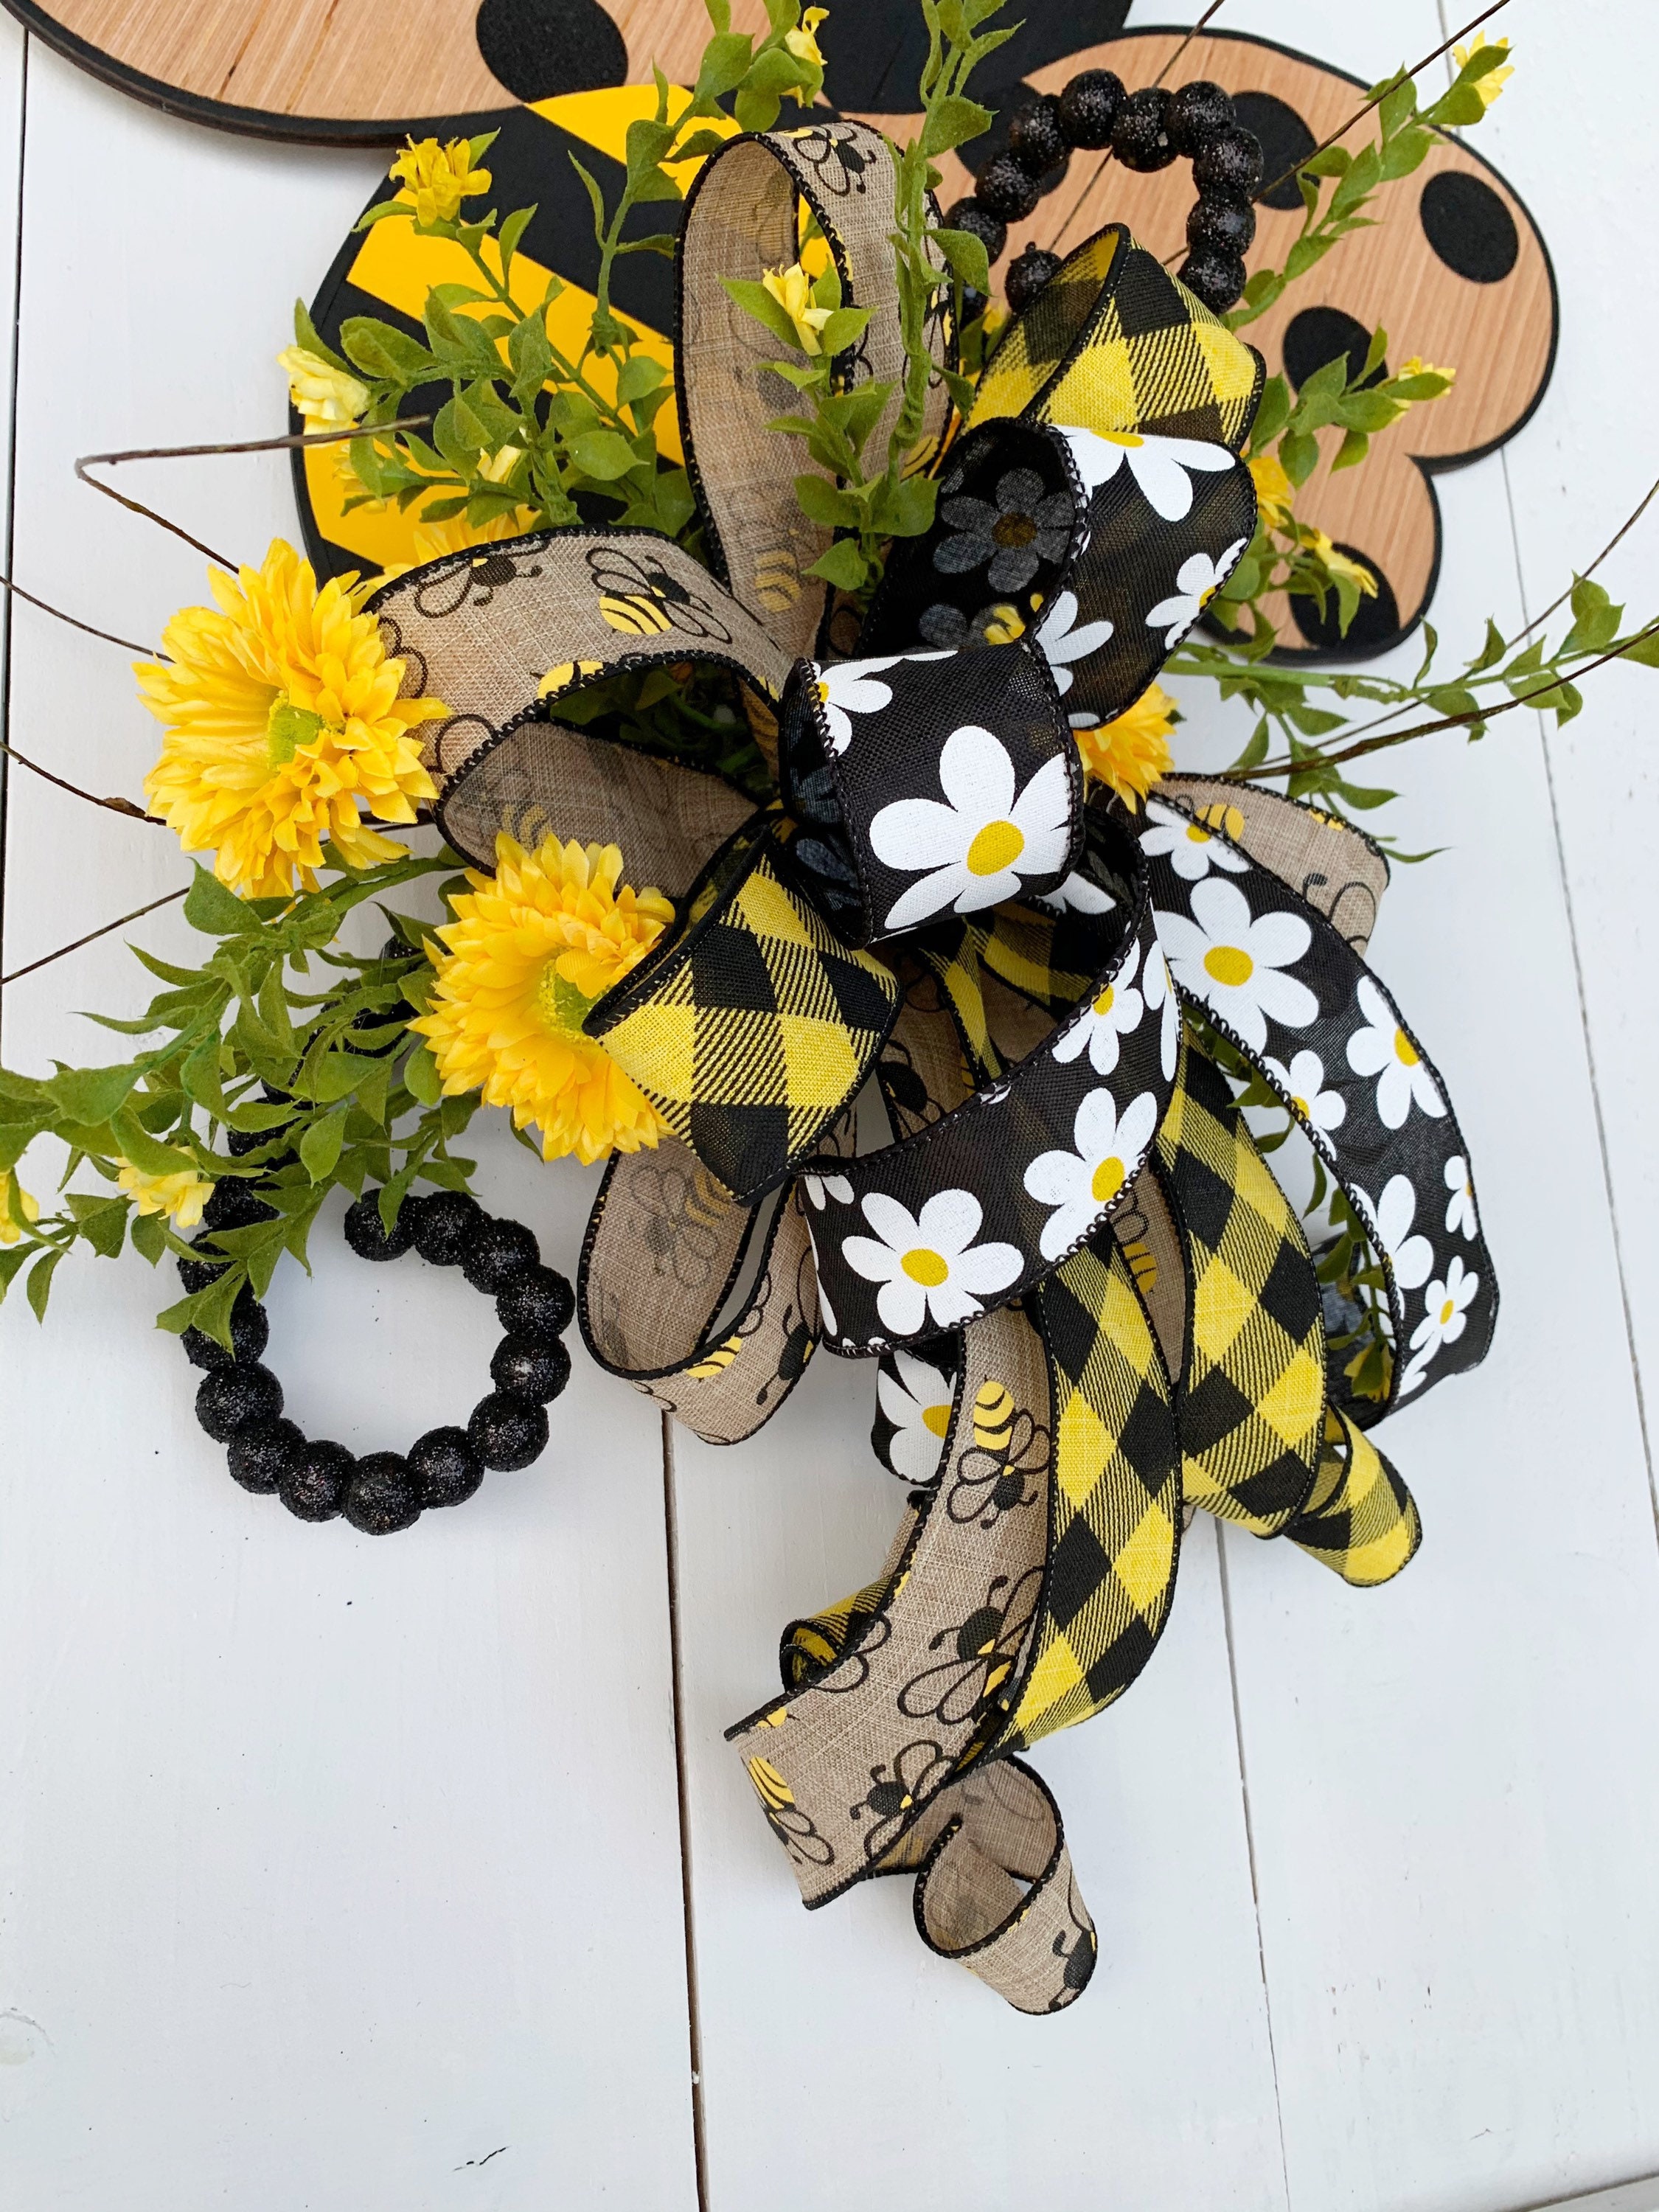 Bees and Honey Comb Front Door Decor. Beekeeper Home Decoration. Honeycomb  Decor. Farmhouse Porch Wreath, Yellow Worker Bees Kitchen Decor 